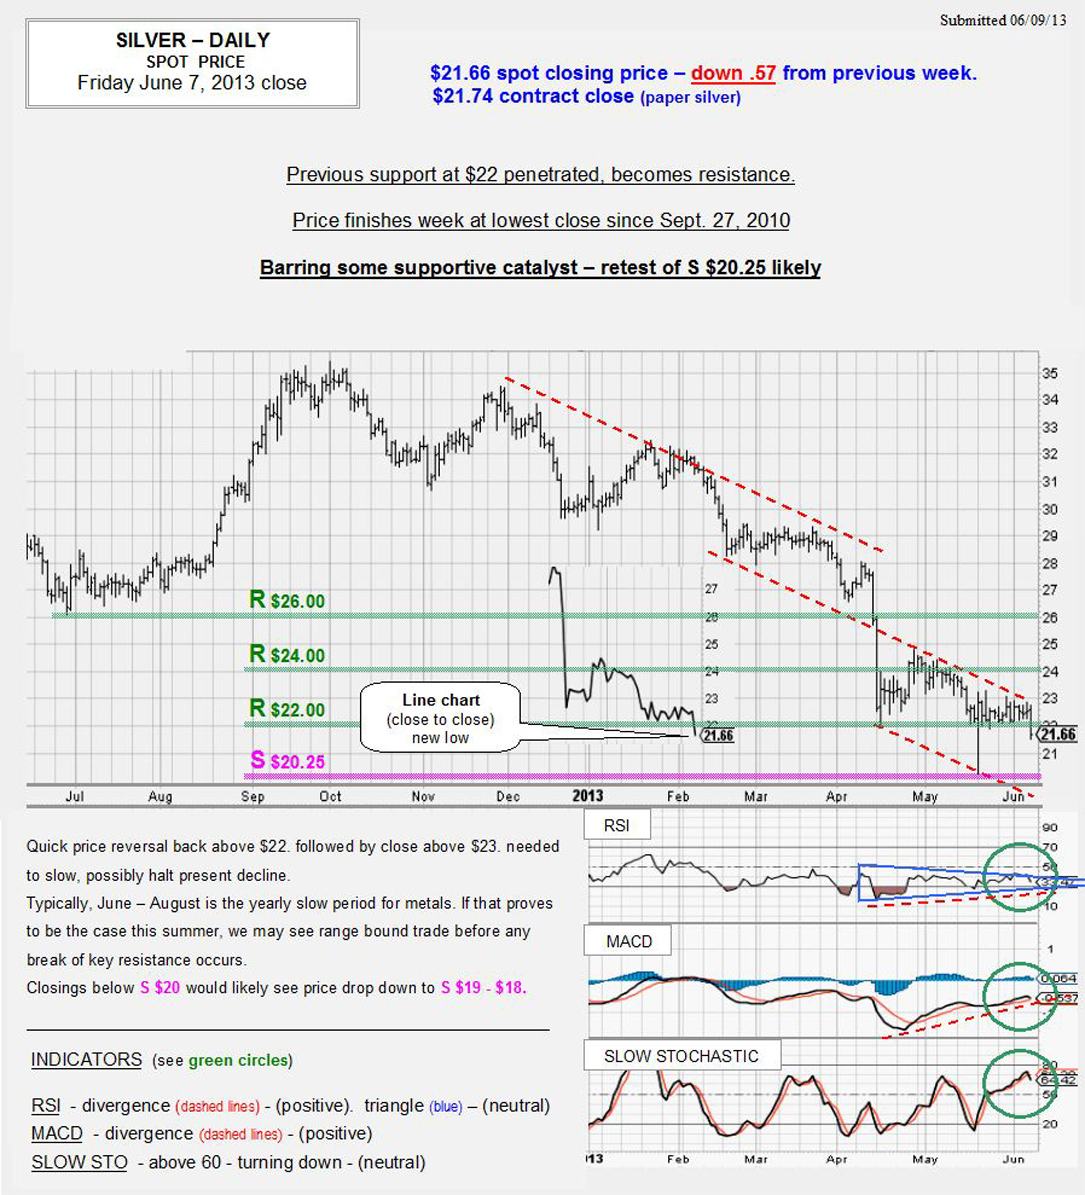 JUNE 7, 2013 chart & commentary